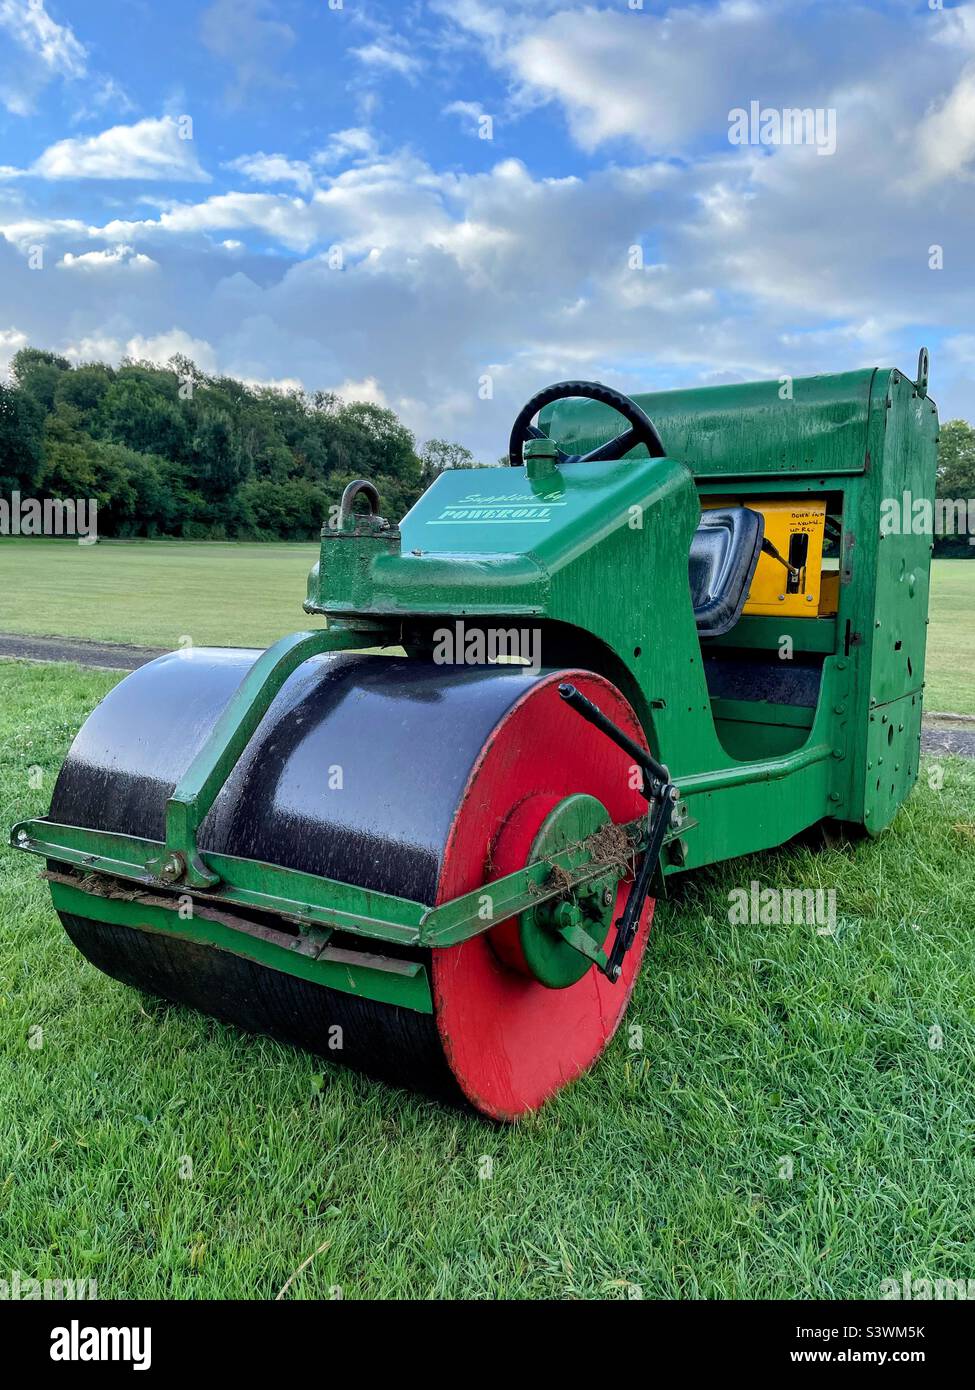 Cricket pitch roller Stock Photo